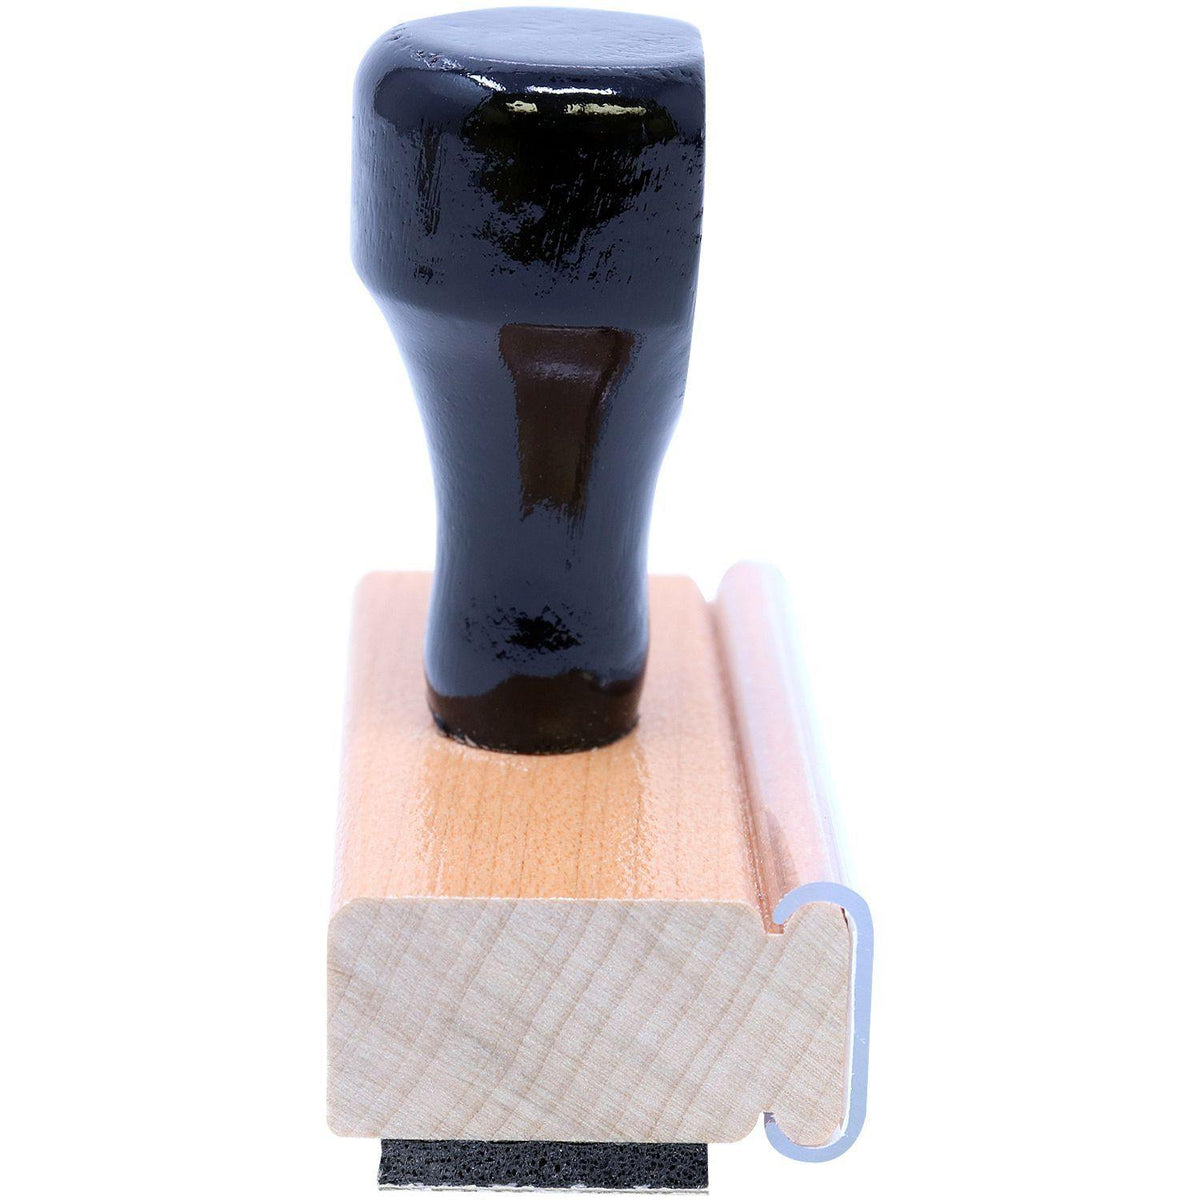 Pregnant Rubber Stamp - Engineer Seal Stamps - Brand_Acorn, Impression Size_Small, Stamp Type_Regular Stamp, Type of Use_Medical Office